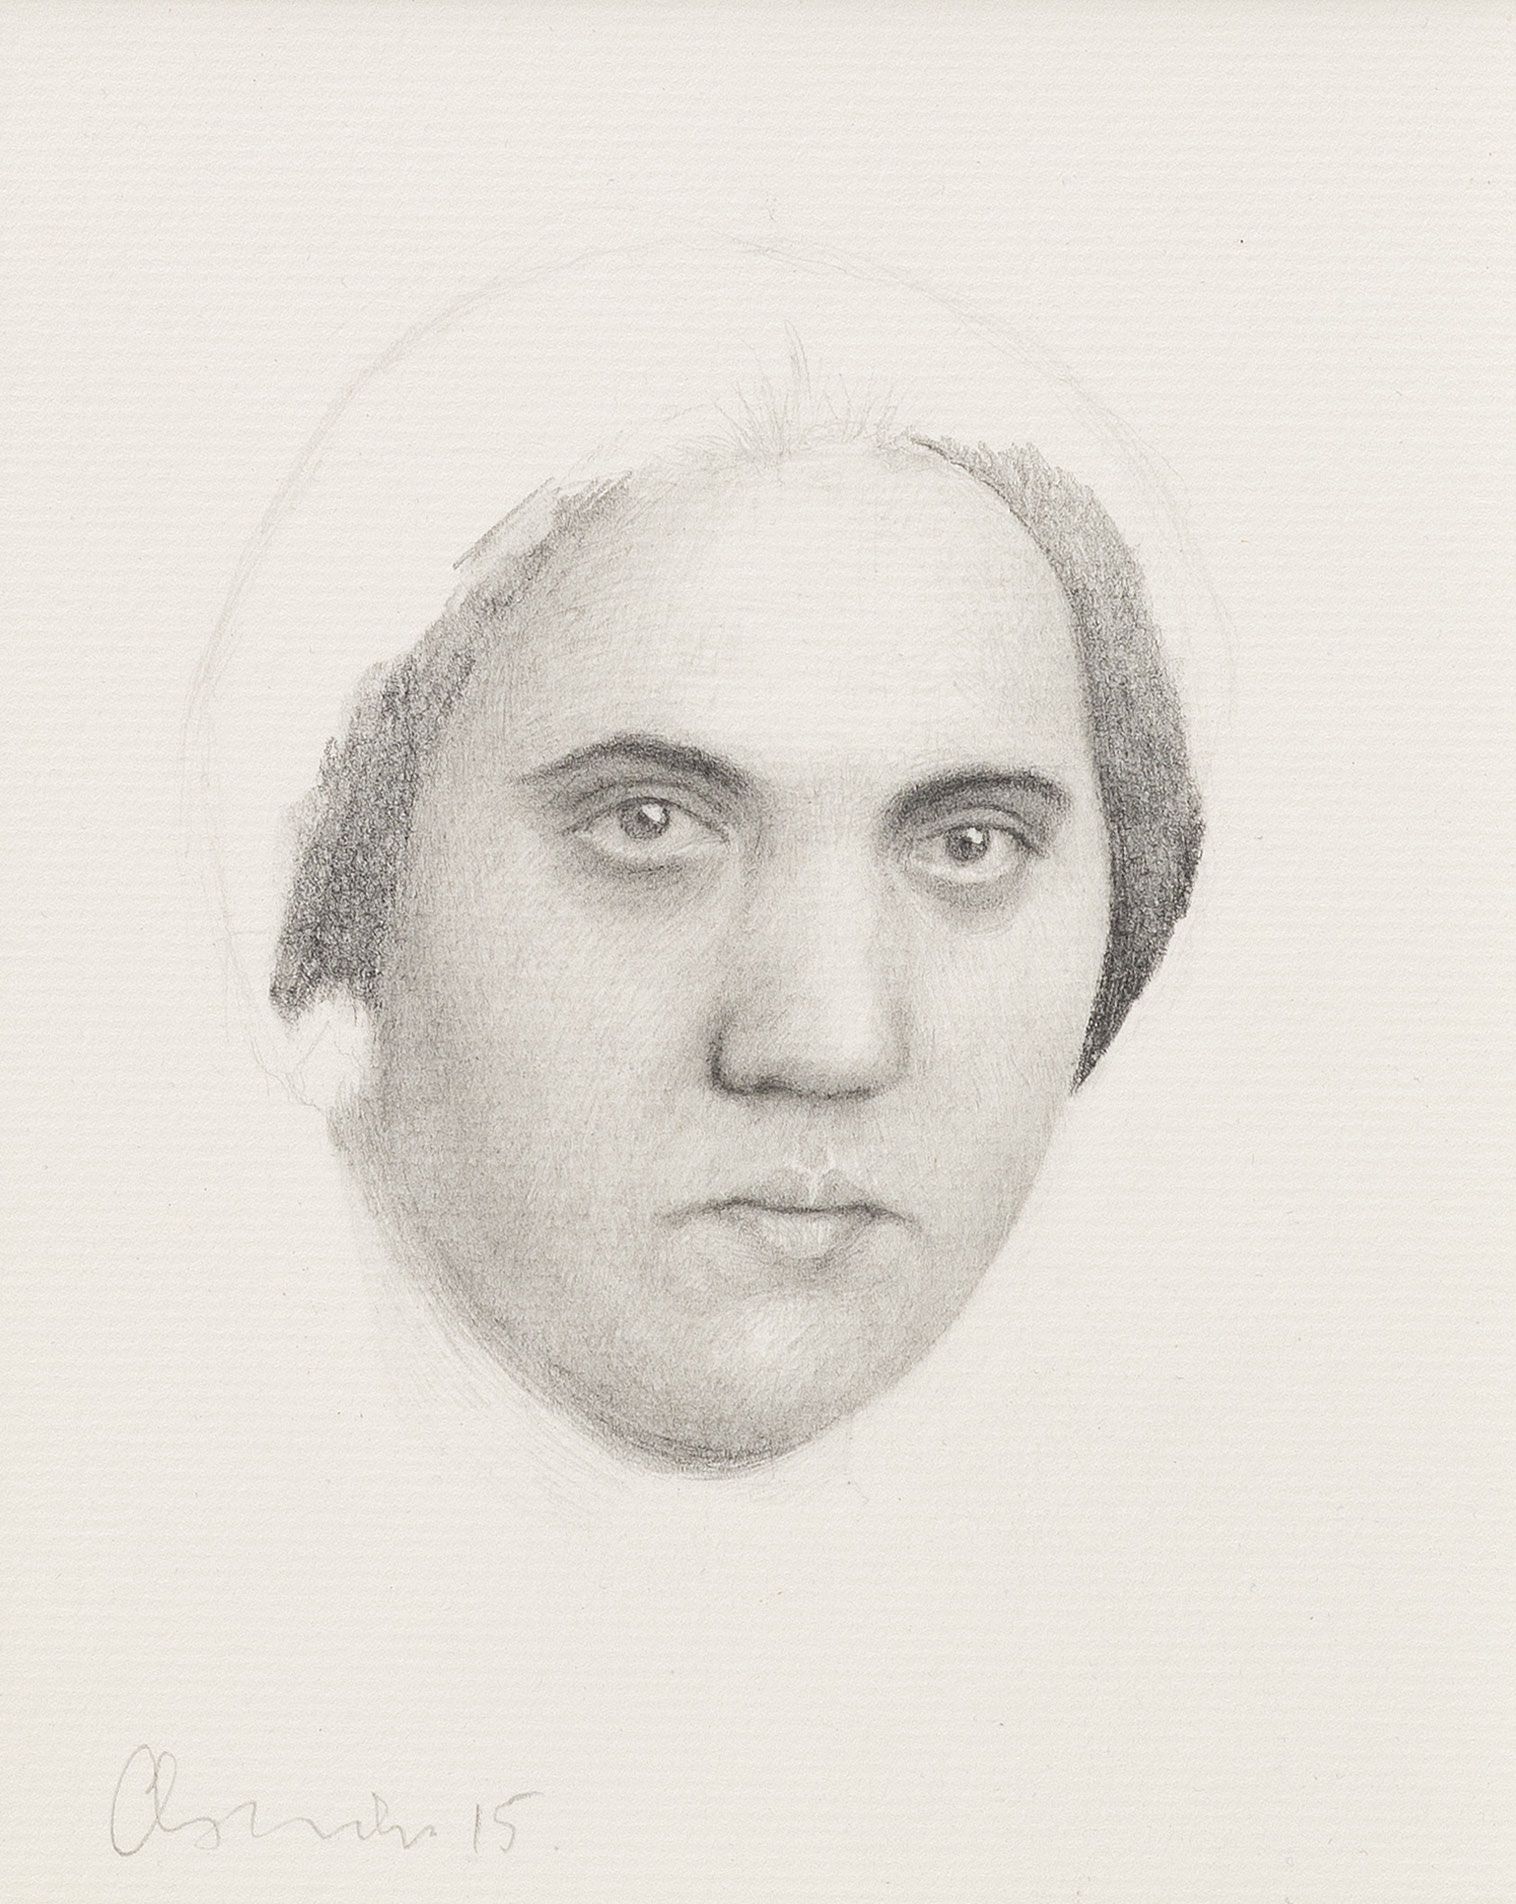 Pencil on paper drawing of  sad German woman's face from the 1940s with dark hair